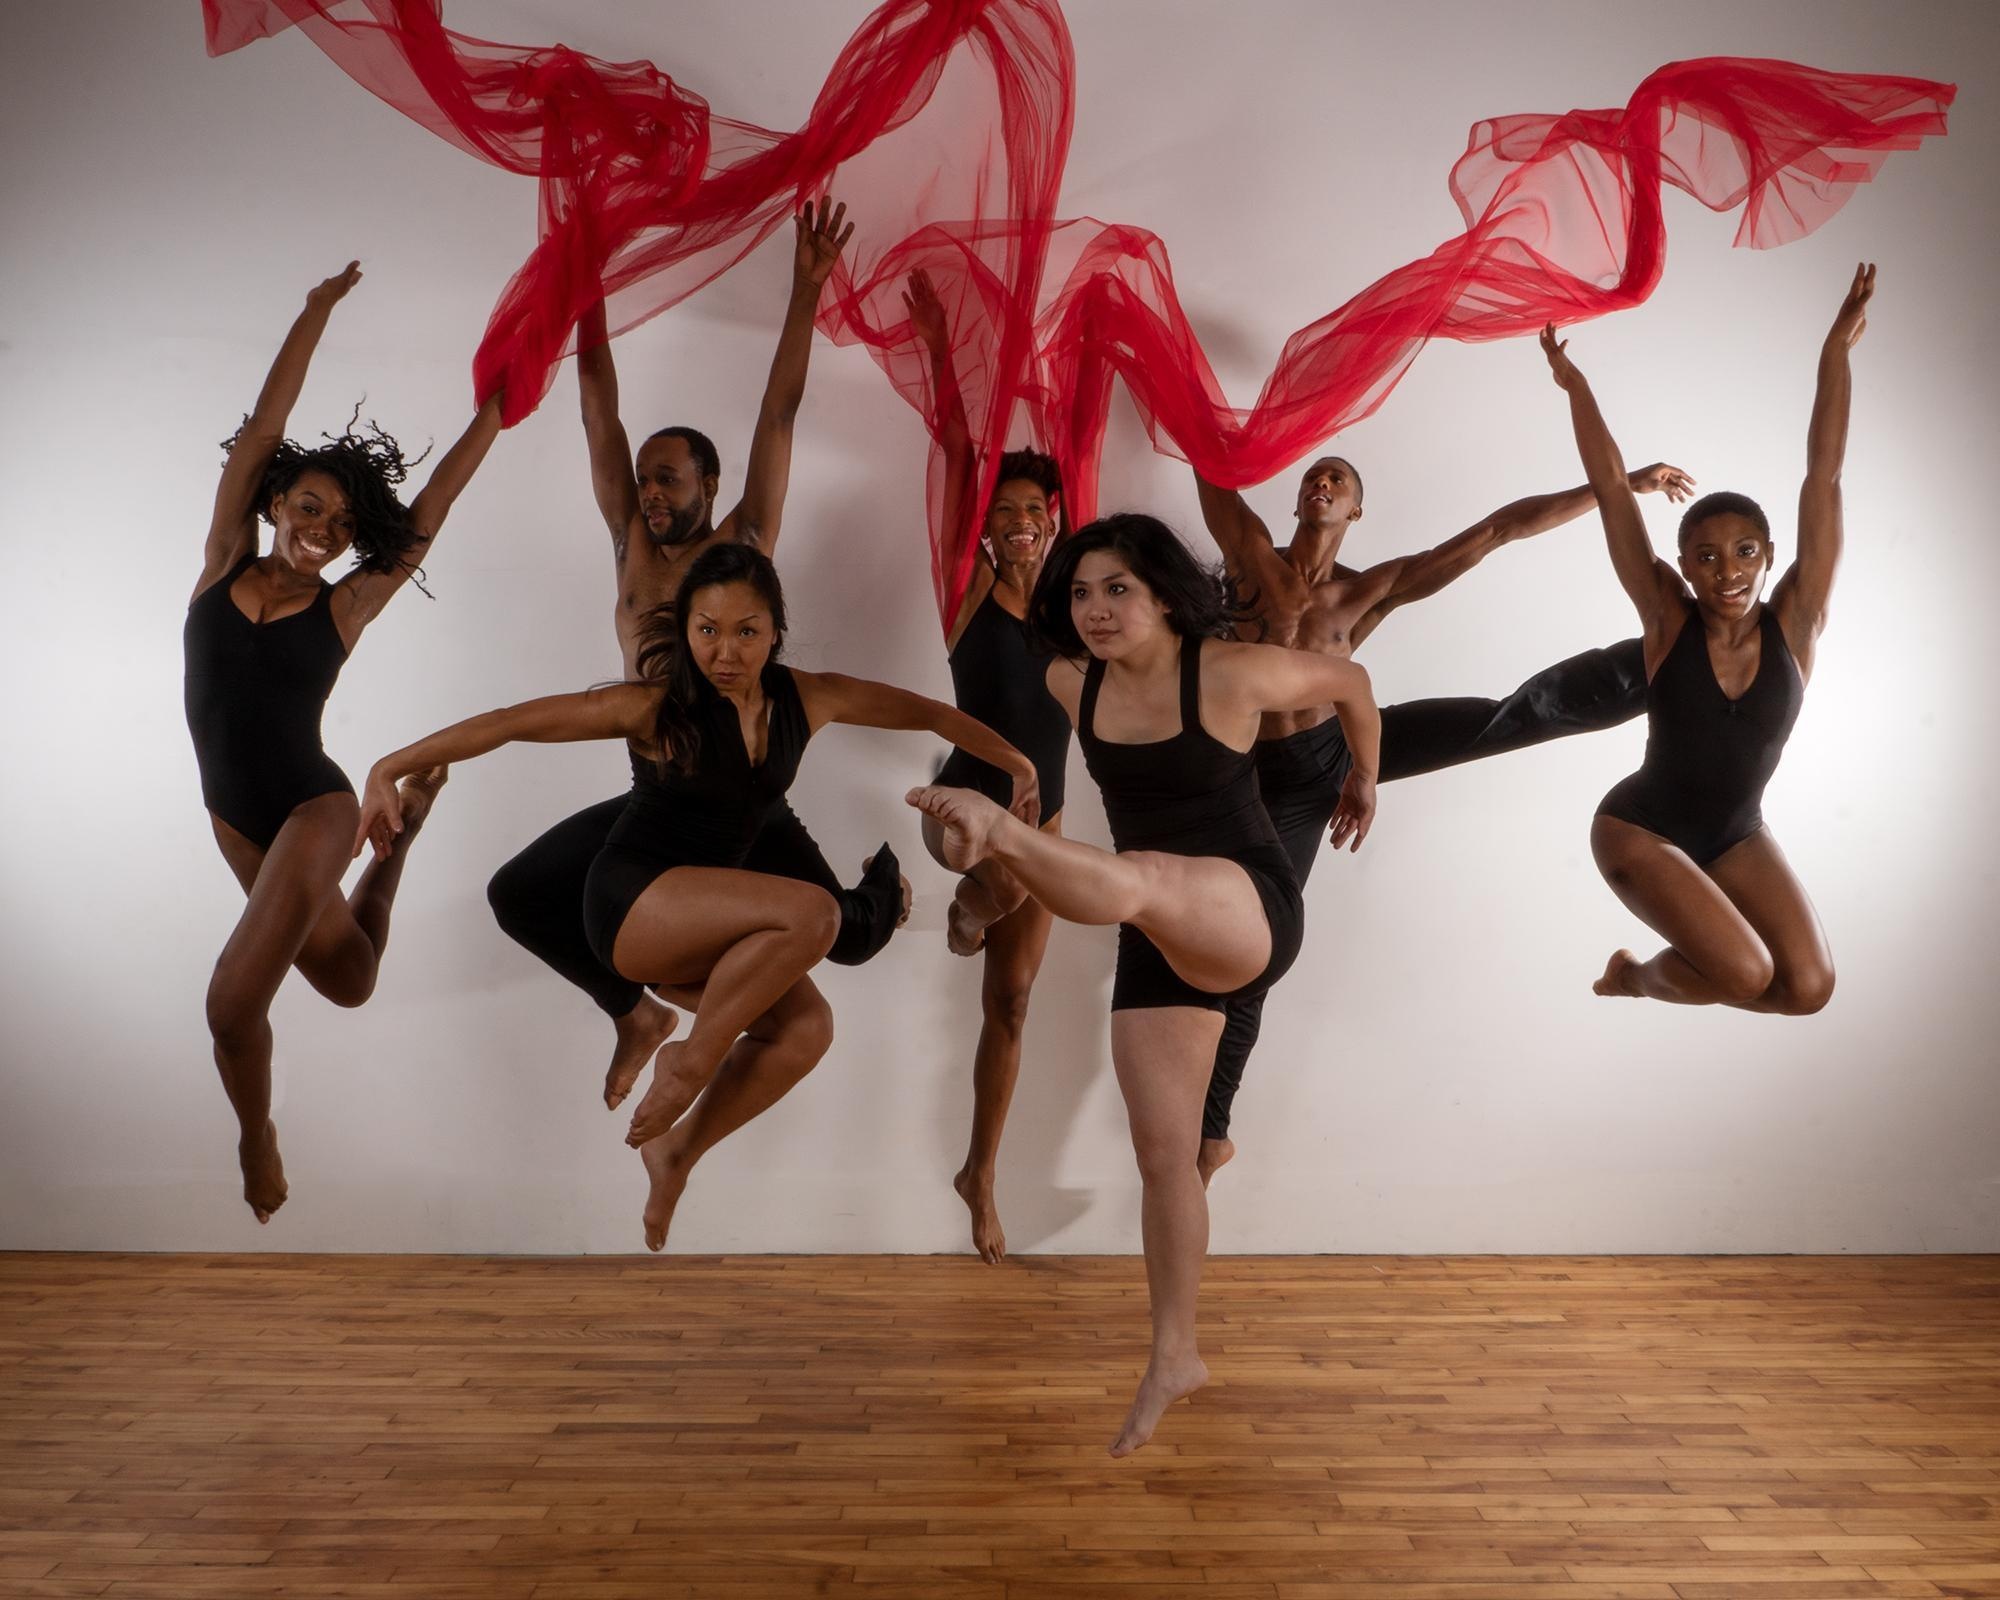 Members of the Rod Rodgers Dance Company leaping and jumping in the air. They are dressed in leotards and dance gear and stretch red gauzy fabric above their heads.